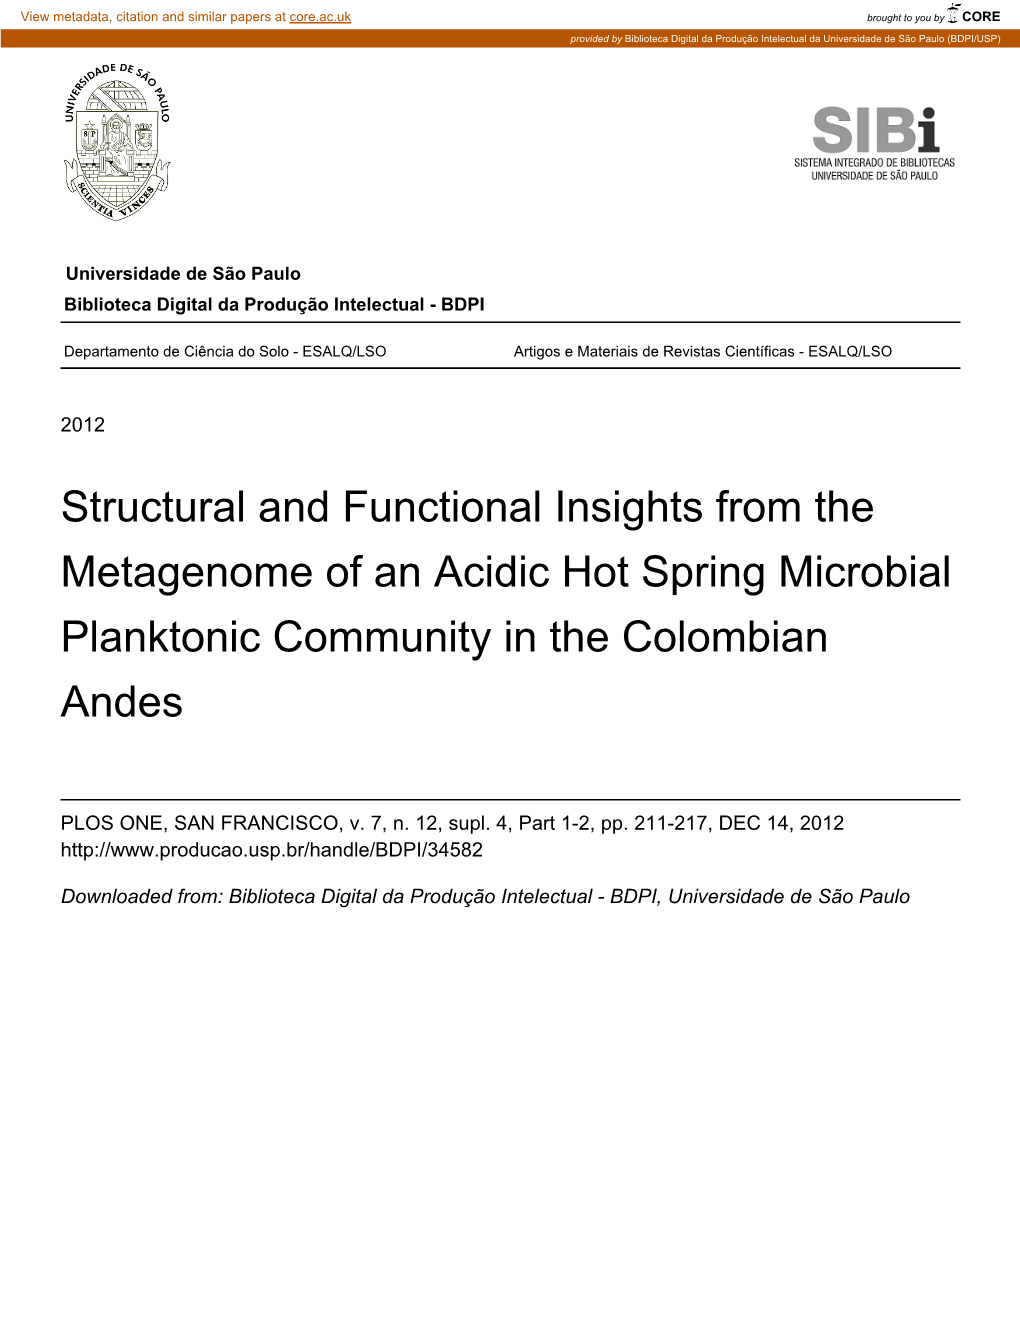 Structural and Functional Insights from the Metagenome of an Acidic Hot Spring Microbial Planktonic Community in the Colombian Andes